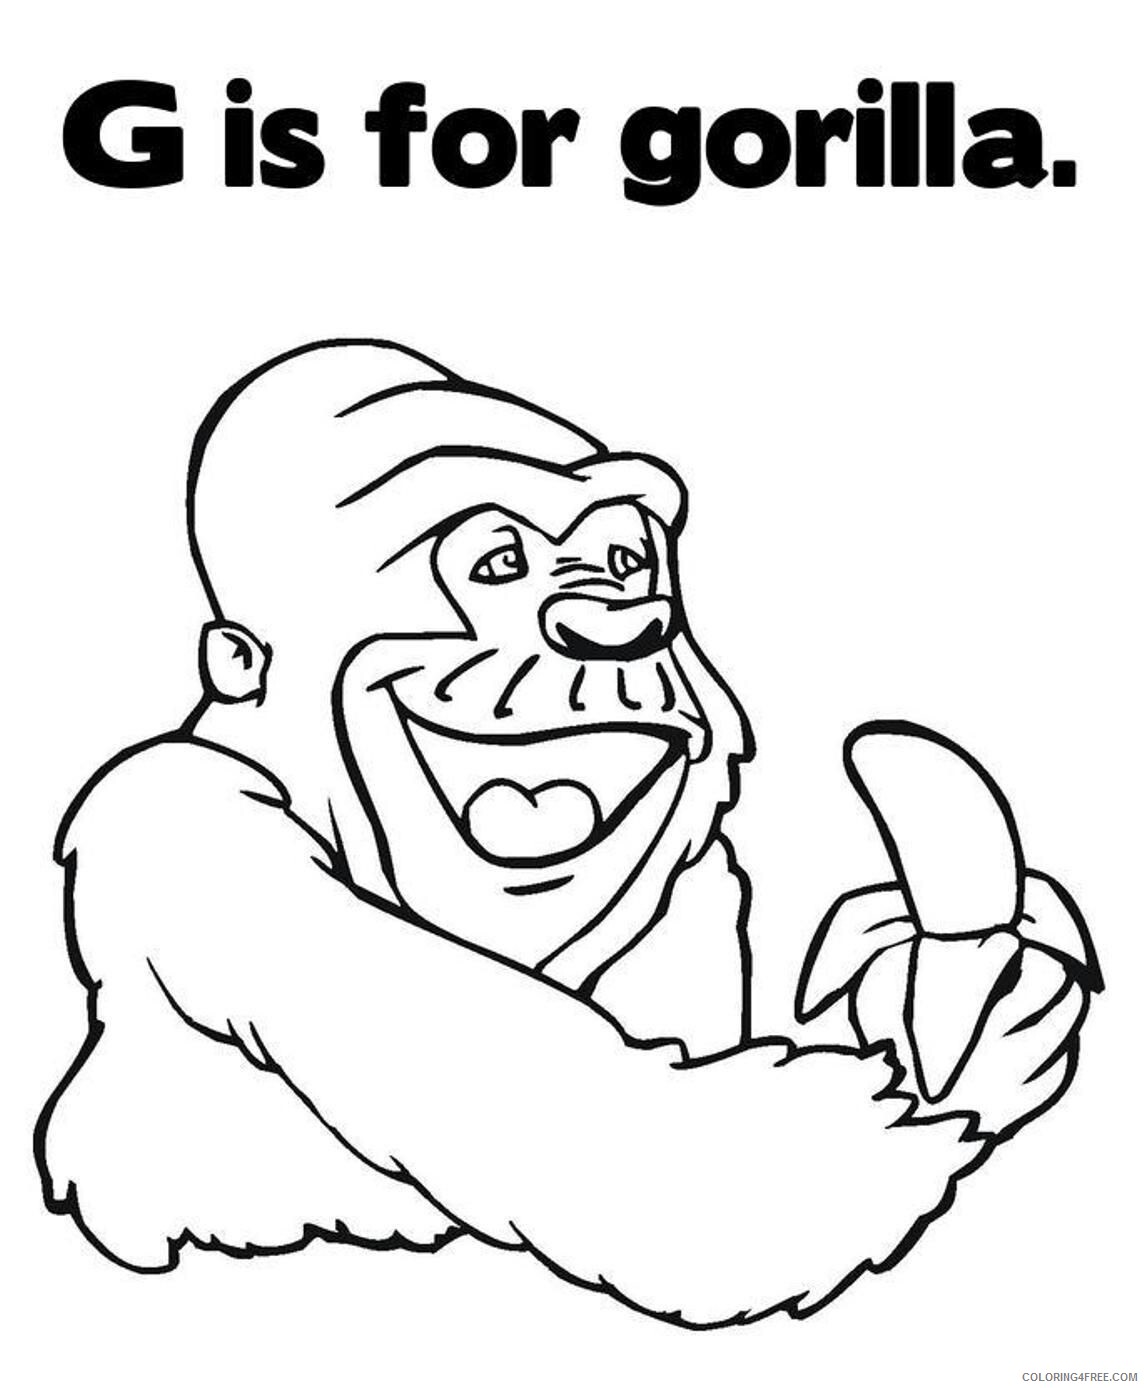 Gorilla Coloring Sheets Animal Coloring Pages Printable 2021 2125 Coloring4free